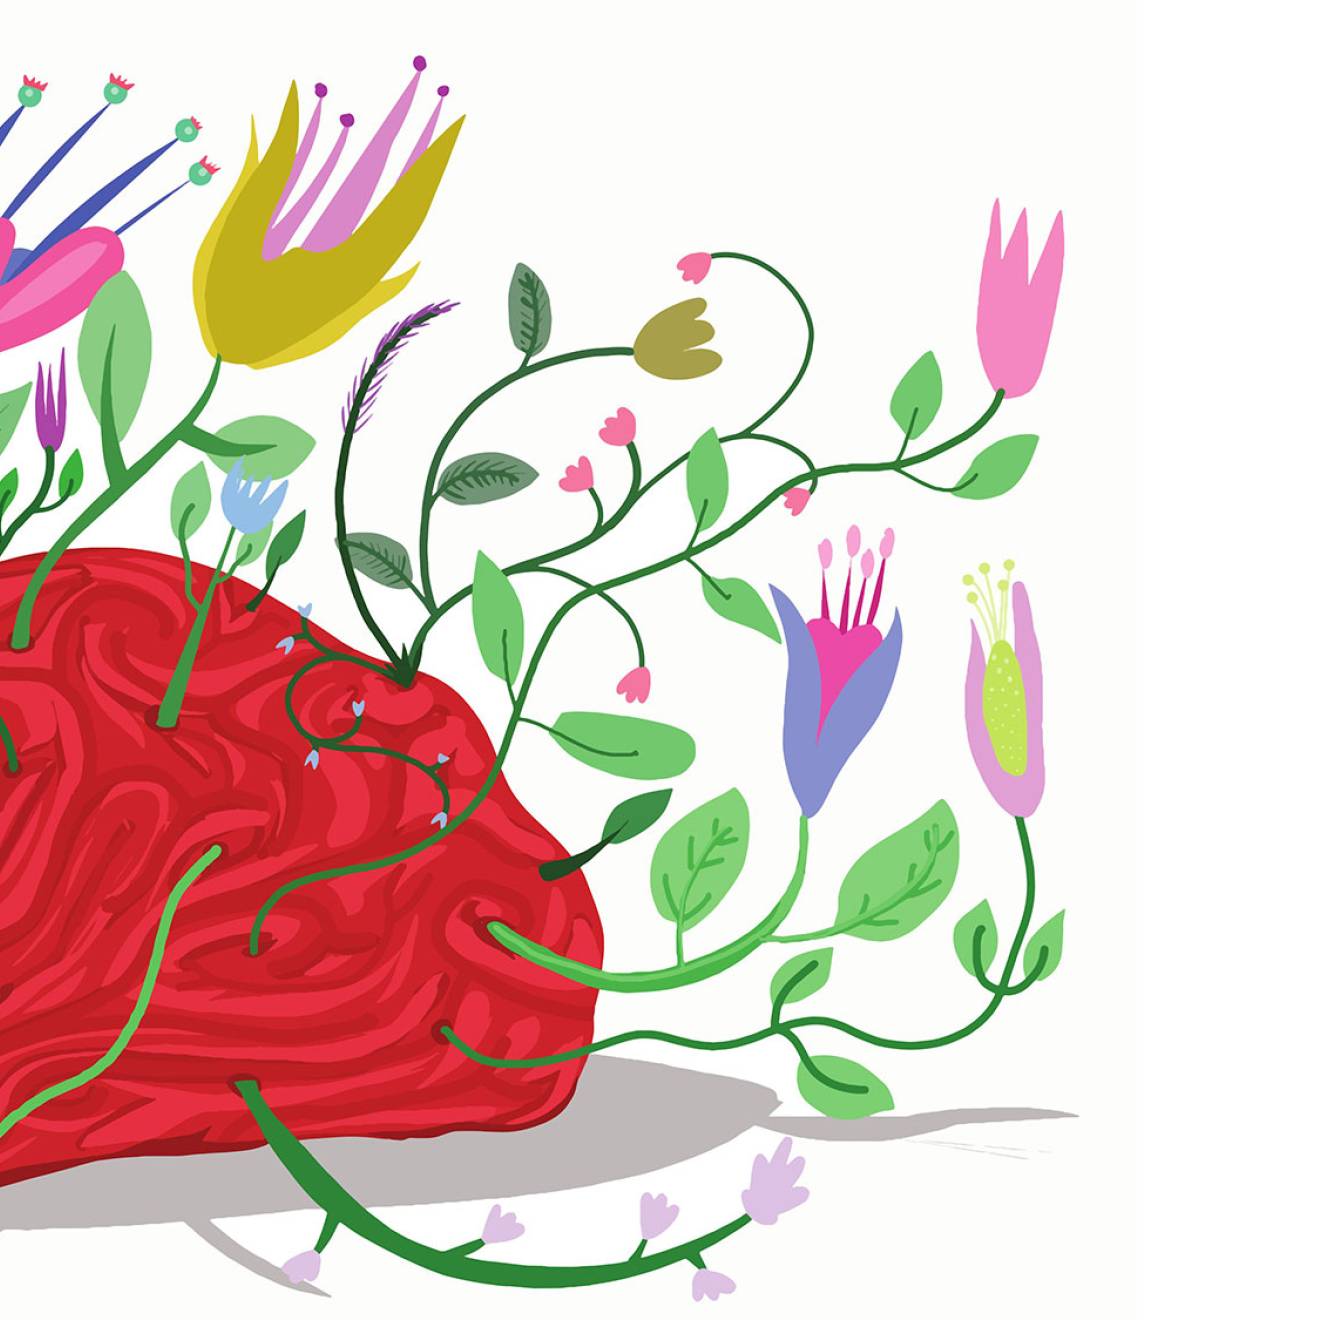 A playful illustration of a red brain with flowers and leaves growing out of it